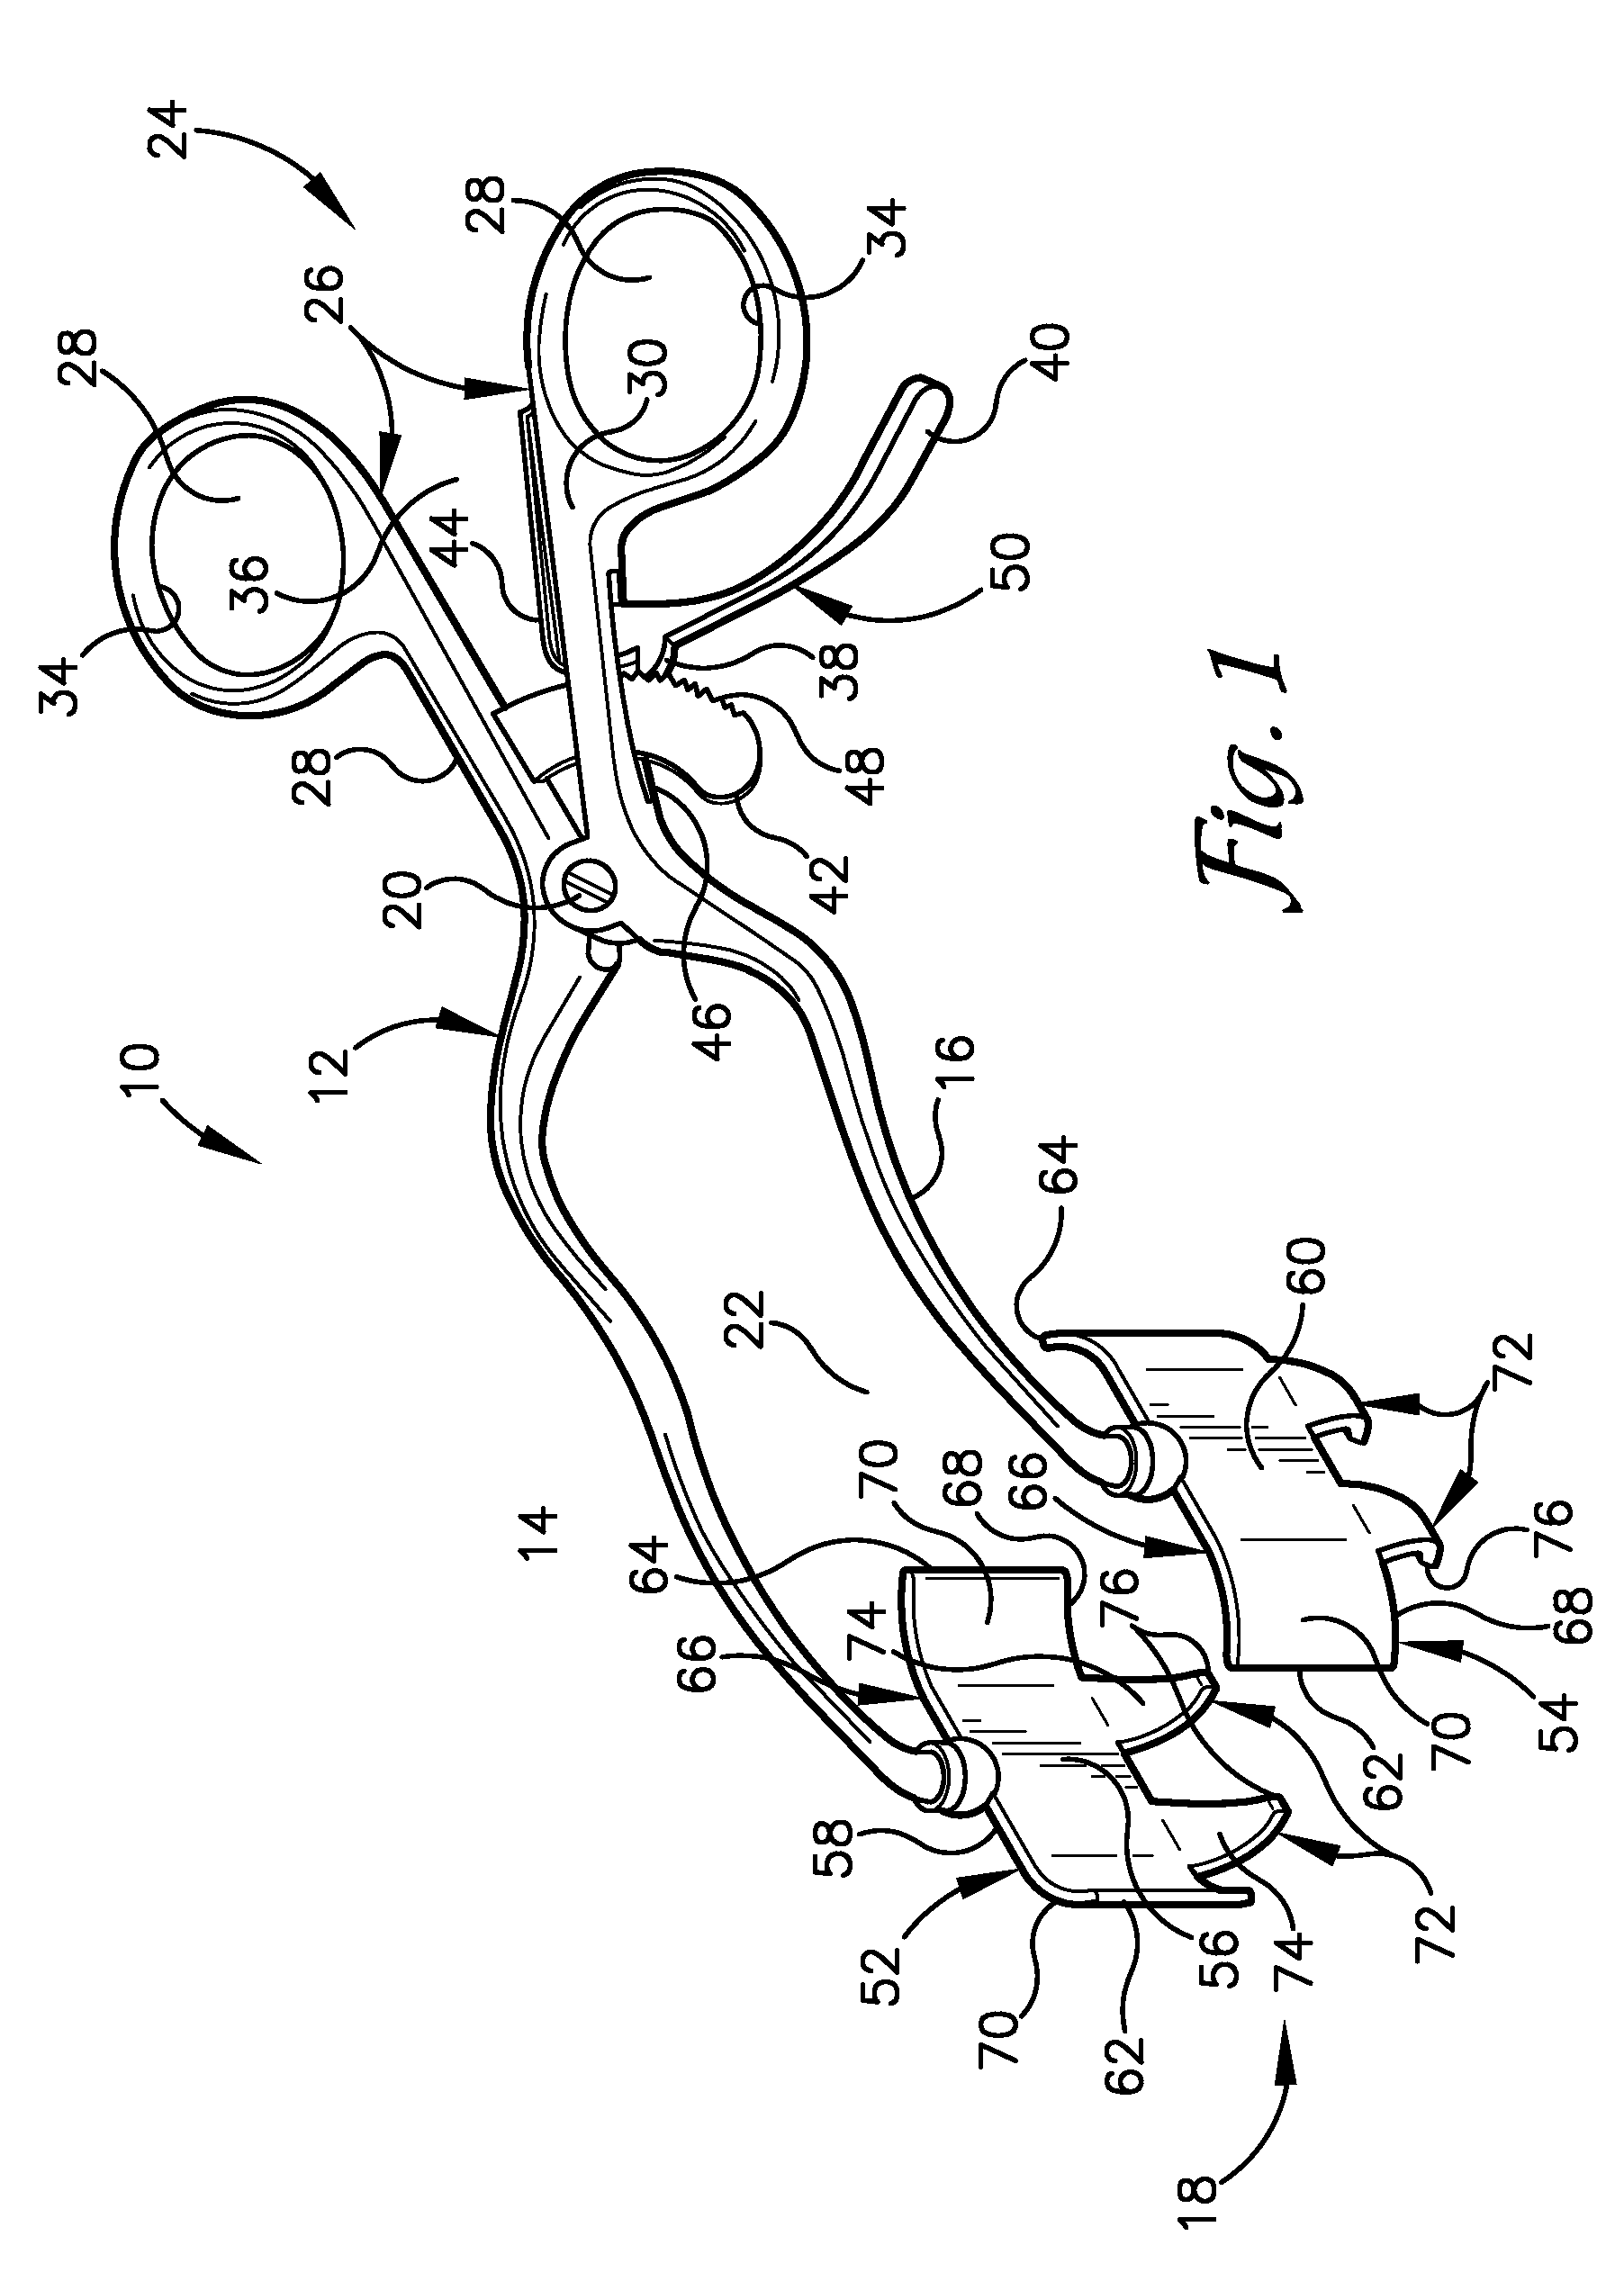 Surgical retractor apparatus and method